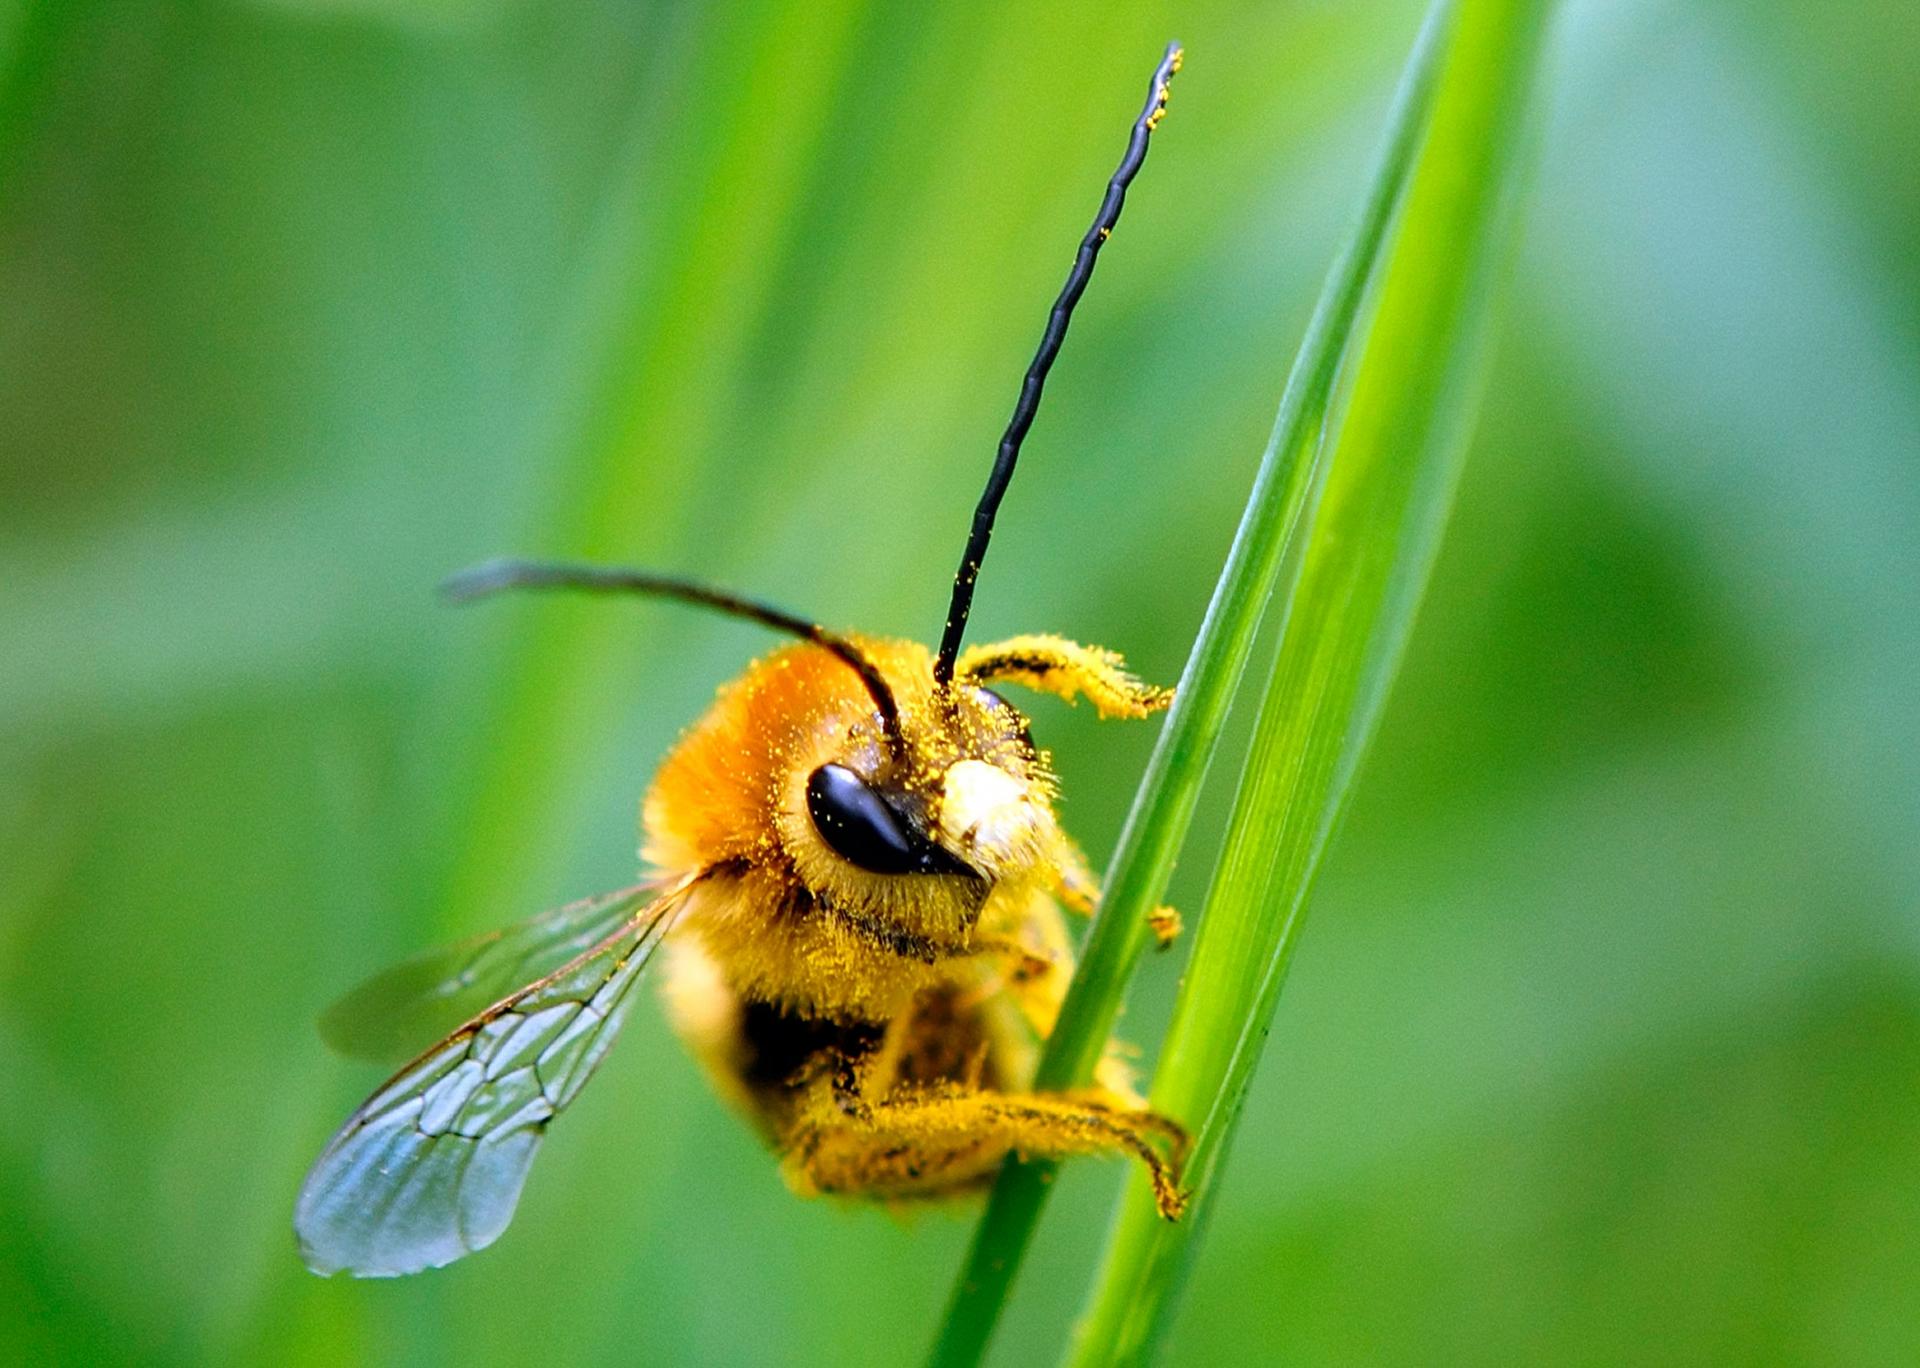 A bee is covered with pollen as it sits on a blade of grass at a lawn in Klosterneubur, Austria.